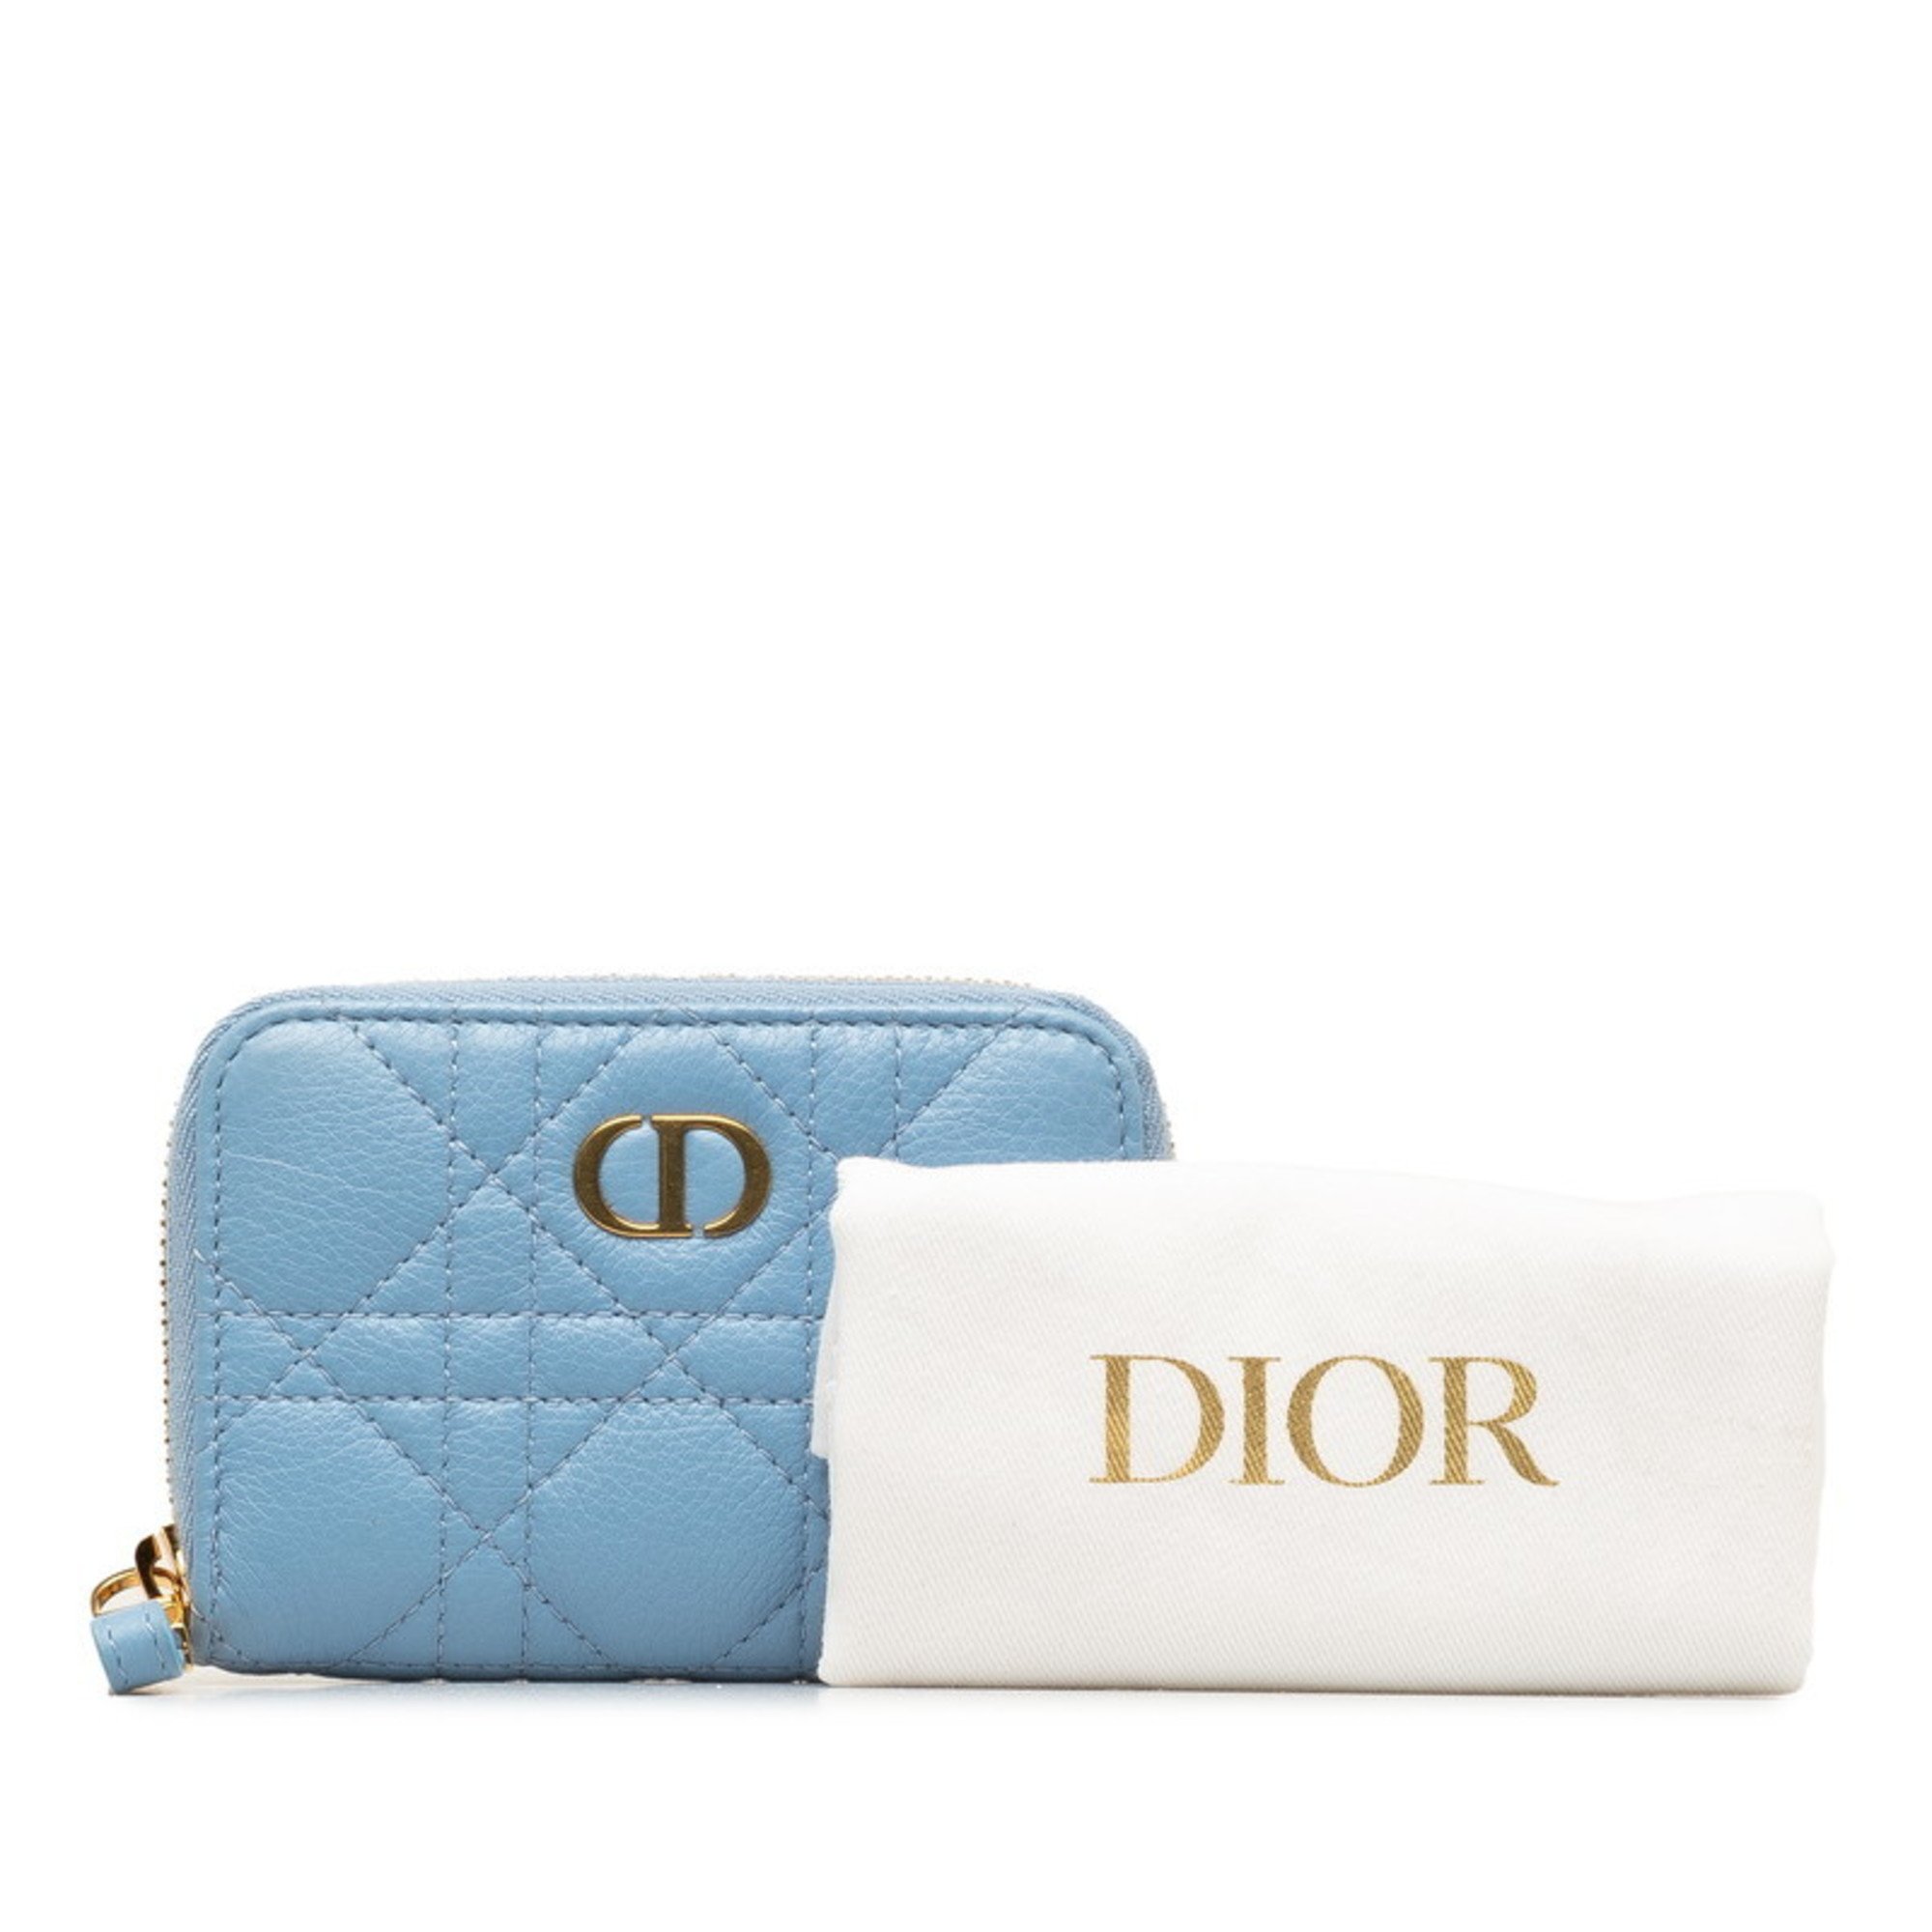 Christian Dior Dior Cannage Card Case Coin Purse Blue Gold Leather Women's